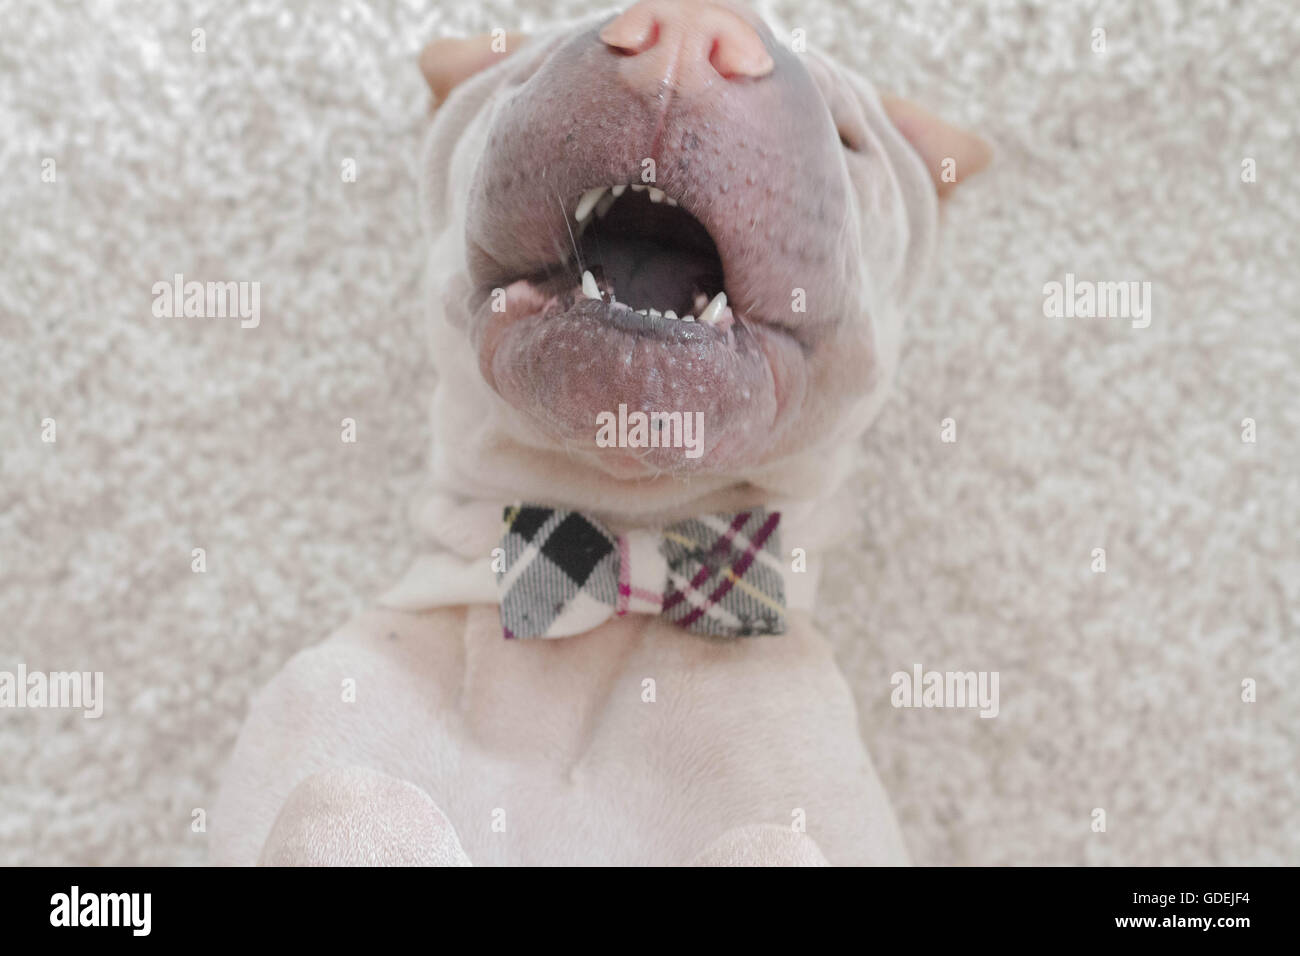 Overhead view of Shar pei dog wearing a bow tie playing Stock Photo